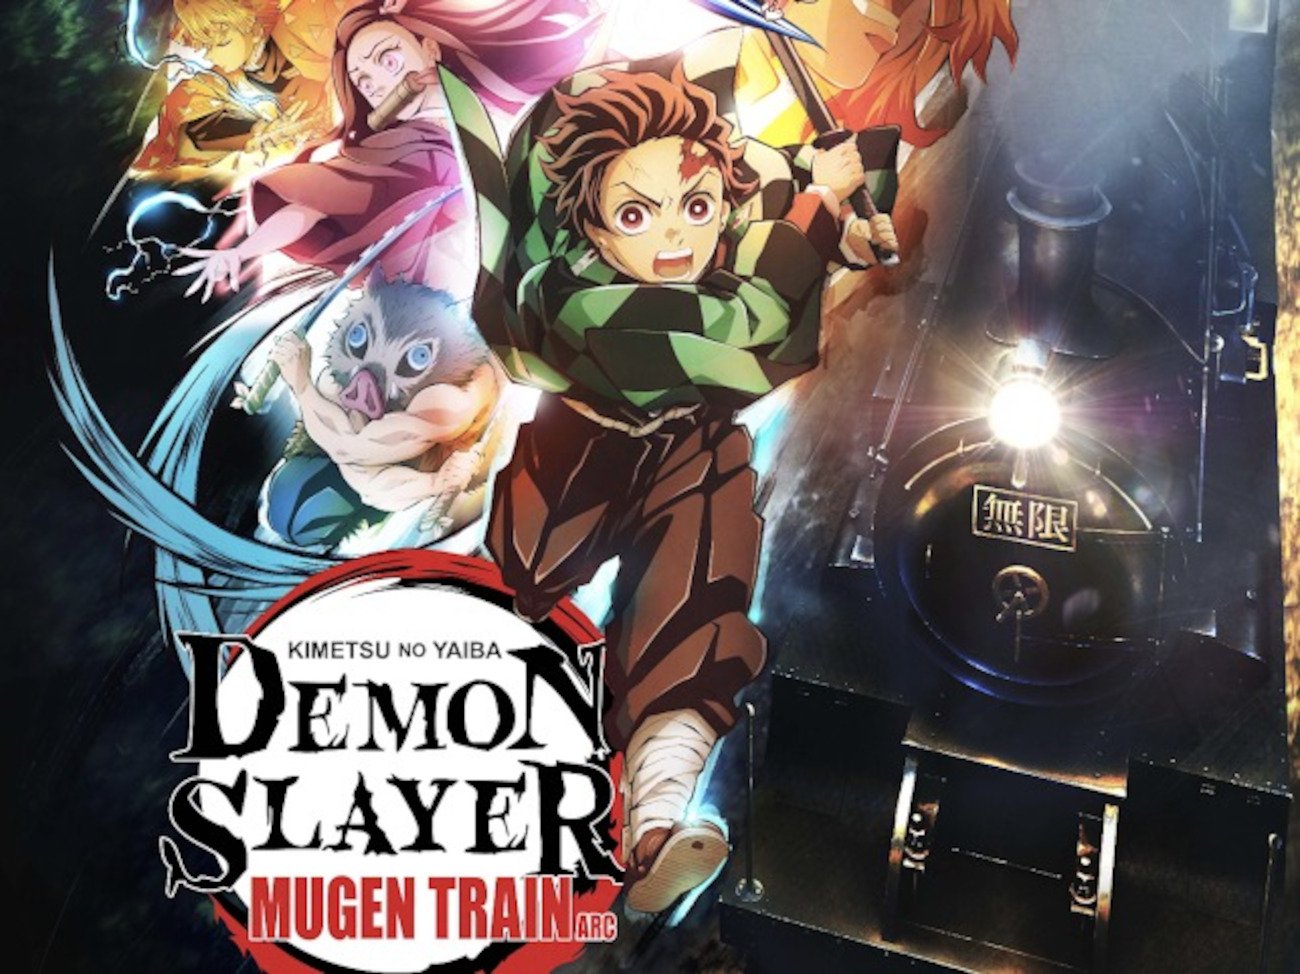 Demon Slayer Mugen Train Whats The Movie About Where Can You Watch It